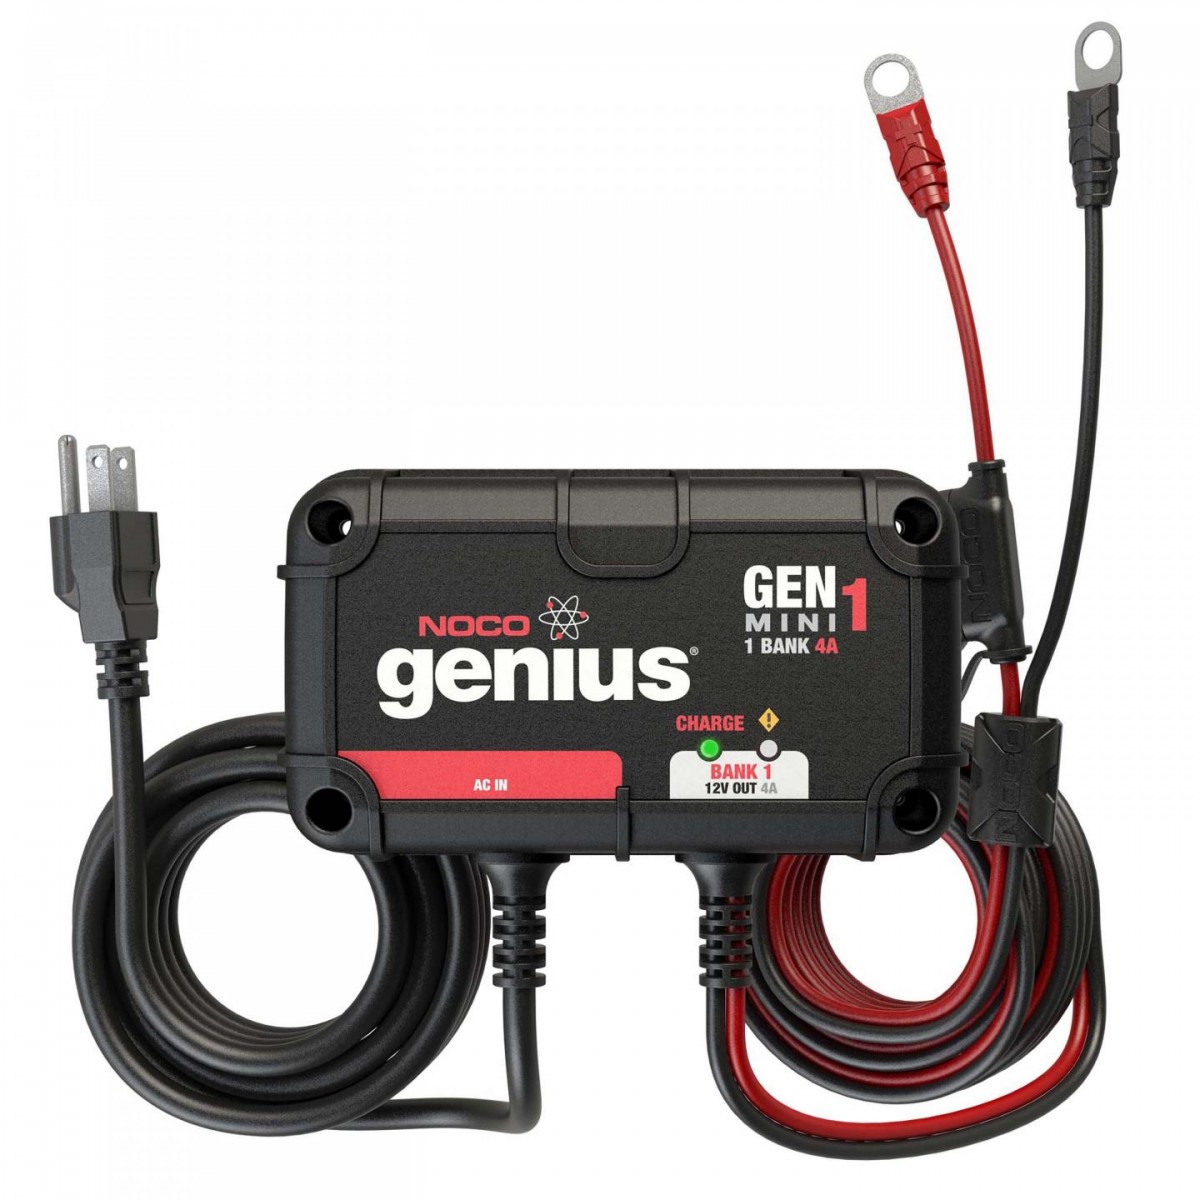 NOCO GENM3 On Board 3 Bank 12A Battery Charger for 12V trolling motor/generator